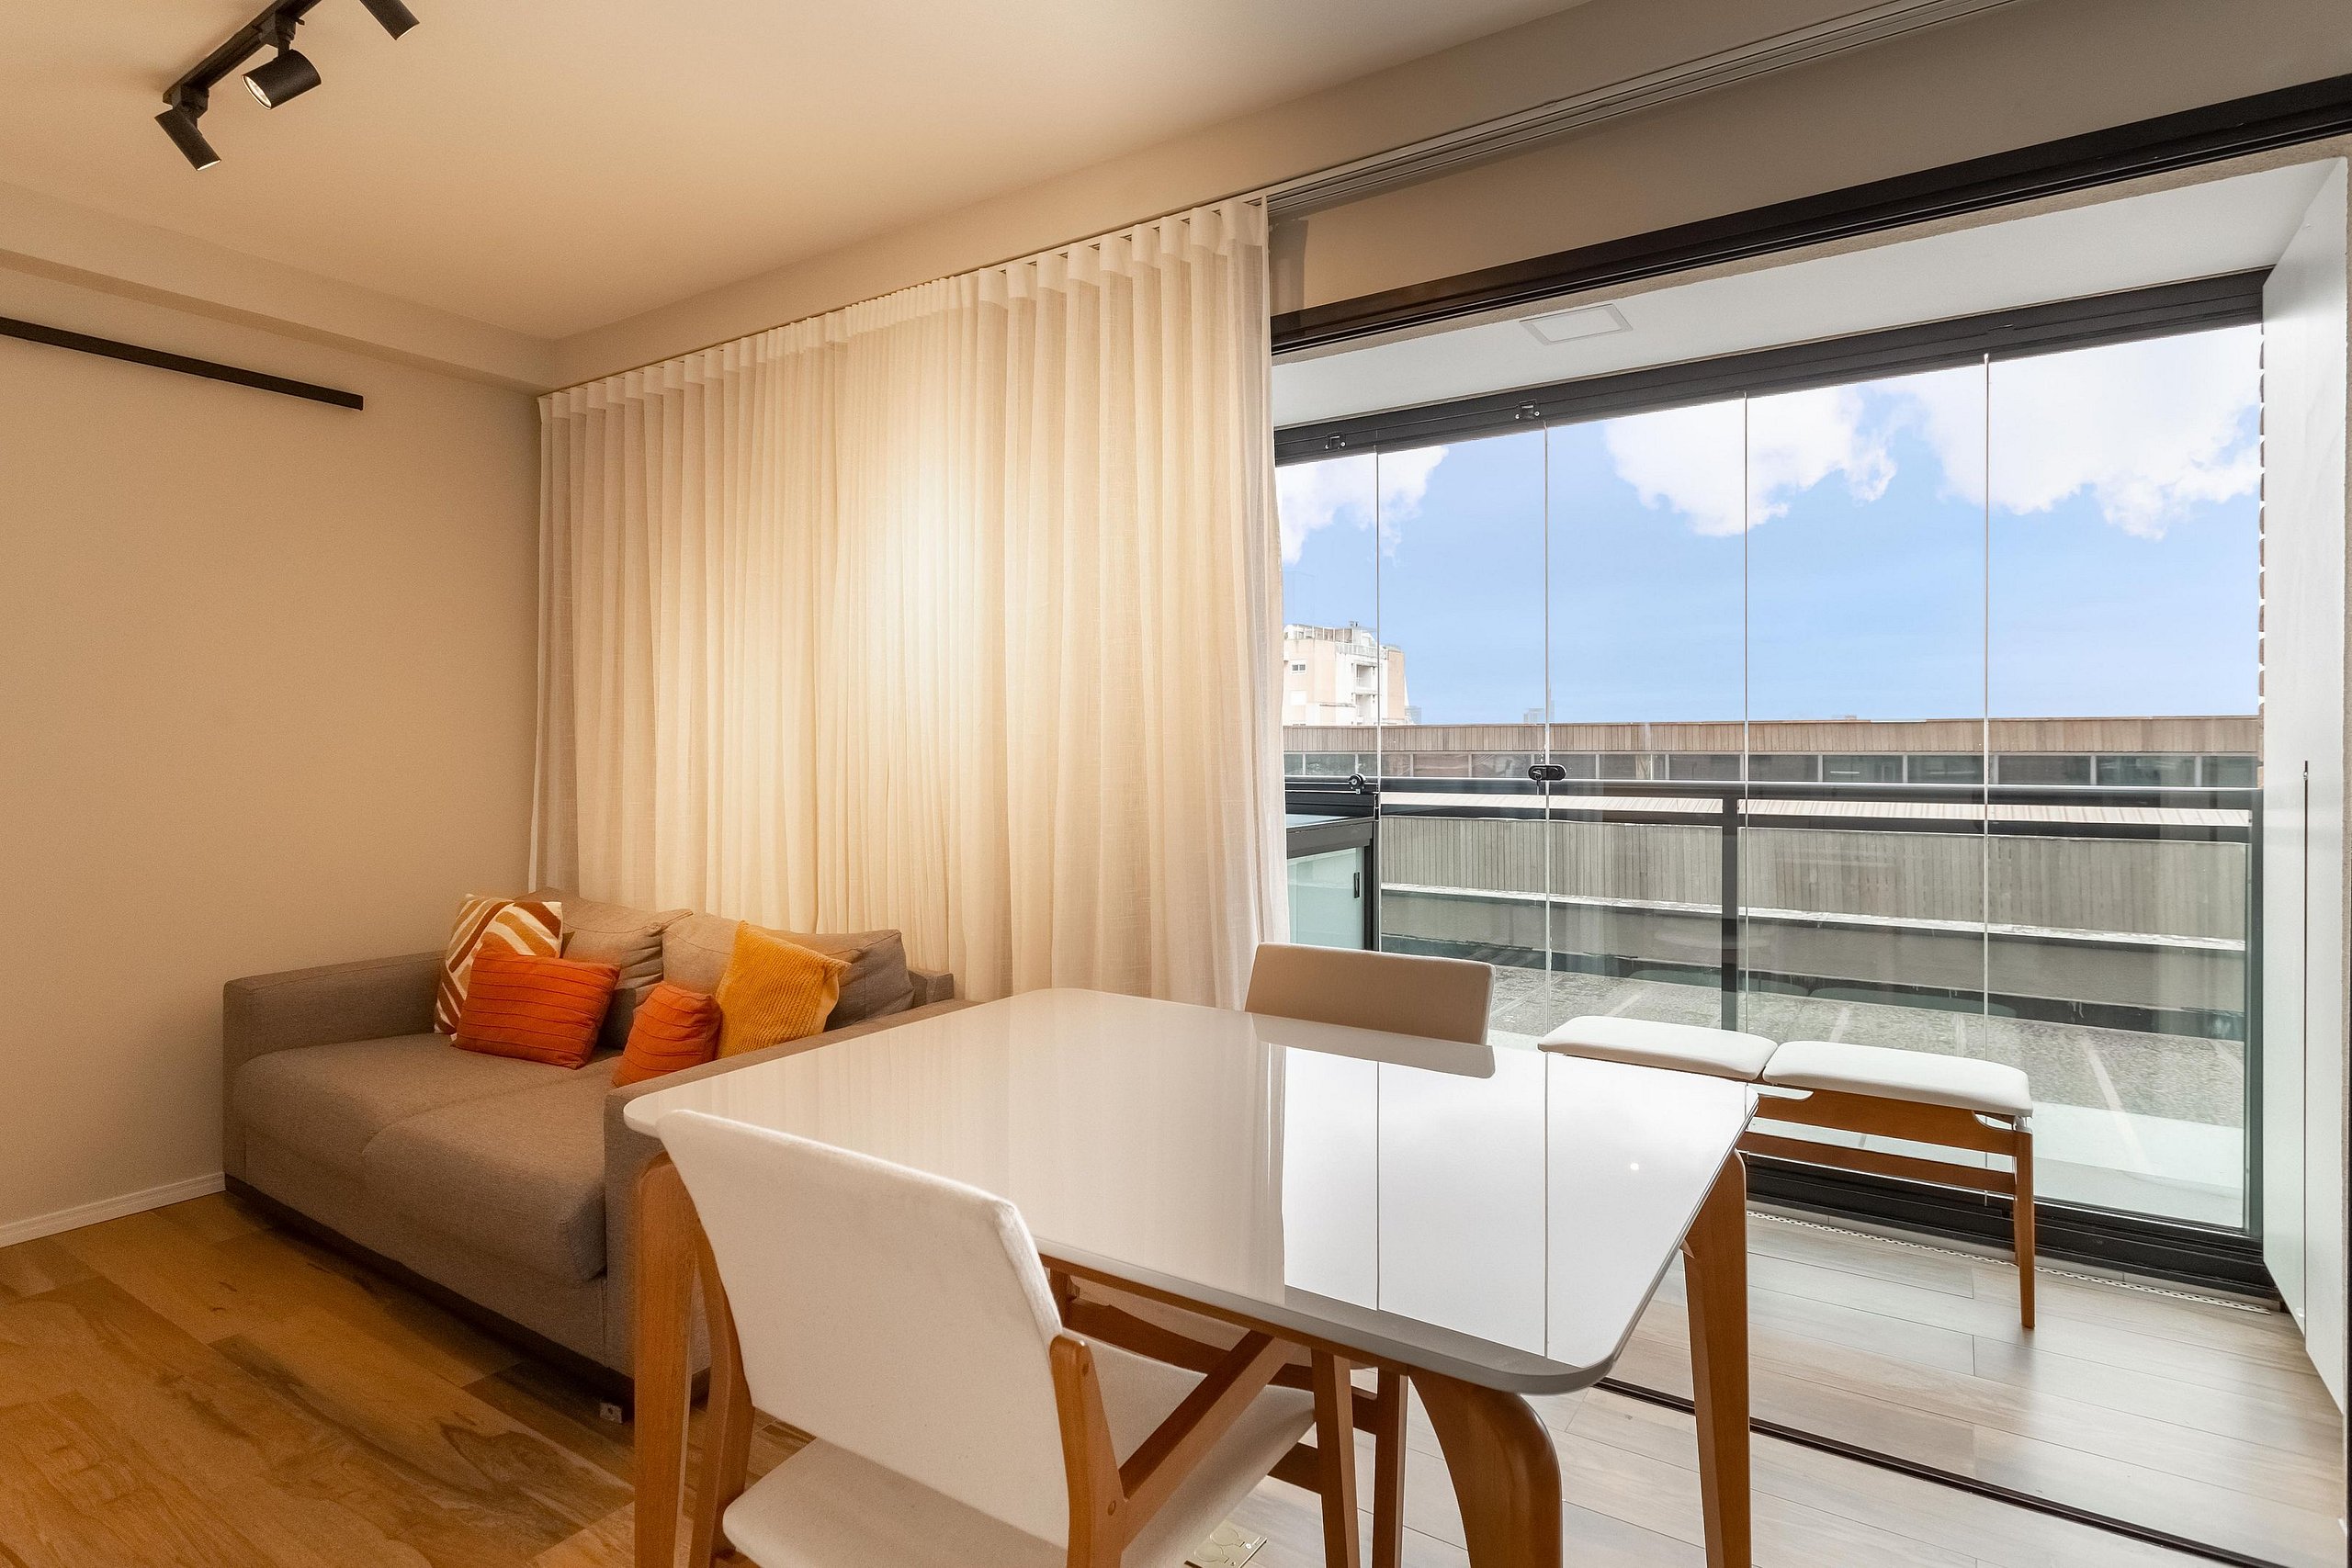 Property Image 1 - Well decorated and cozy apartment in Vila Madalena